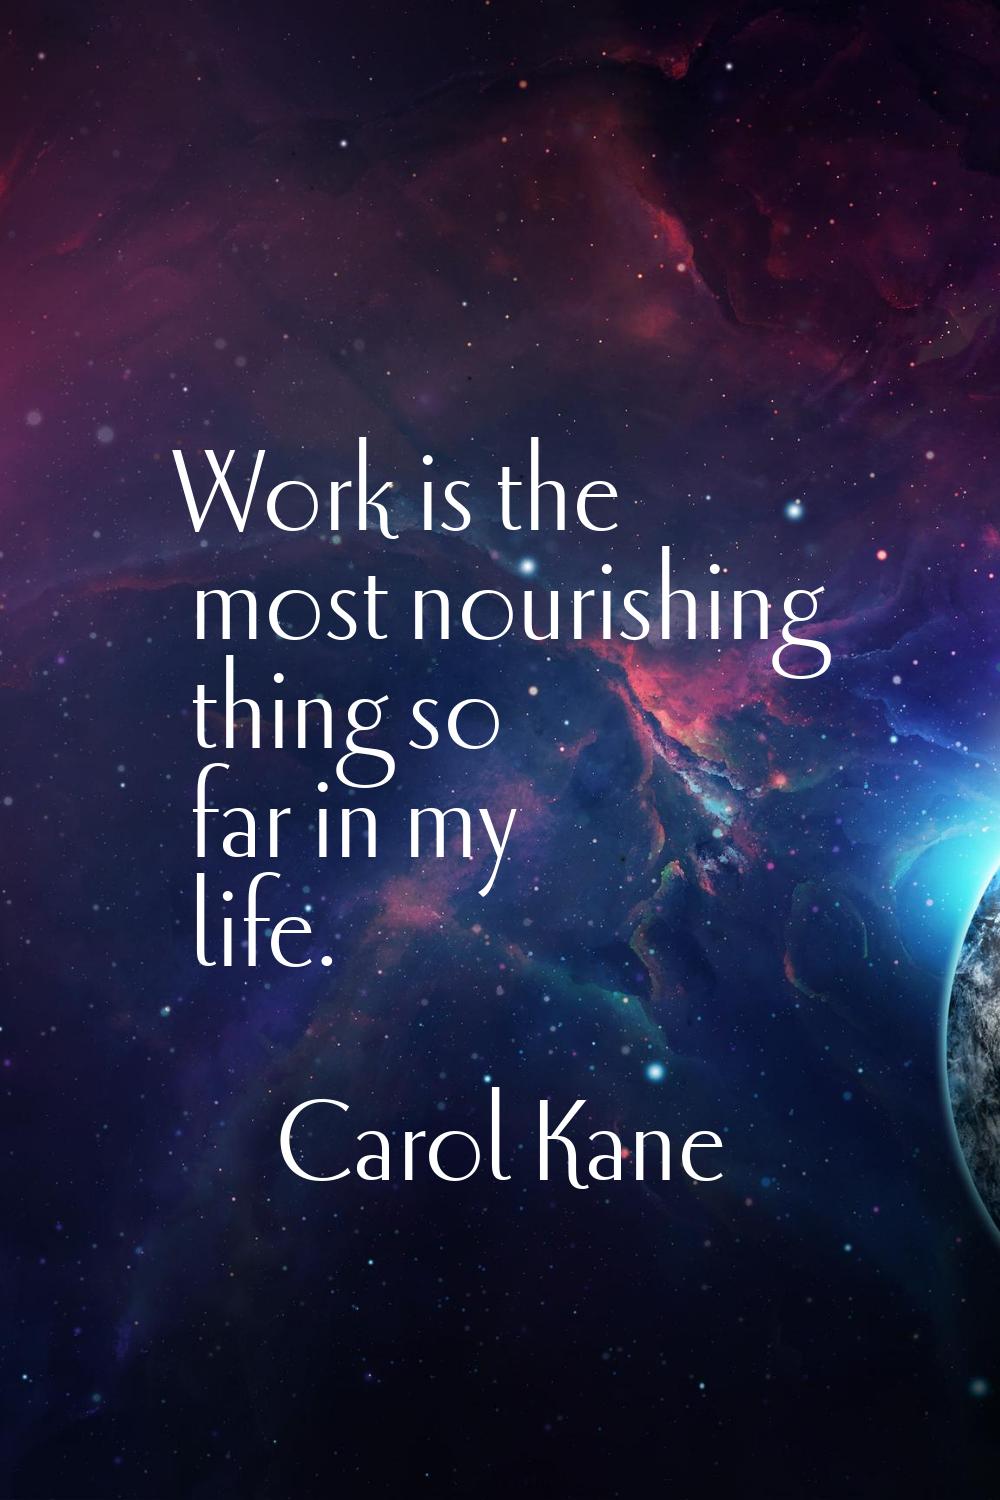 Work is the most nourishing thing so far in my life.